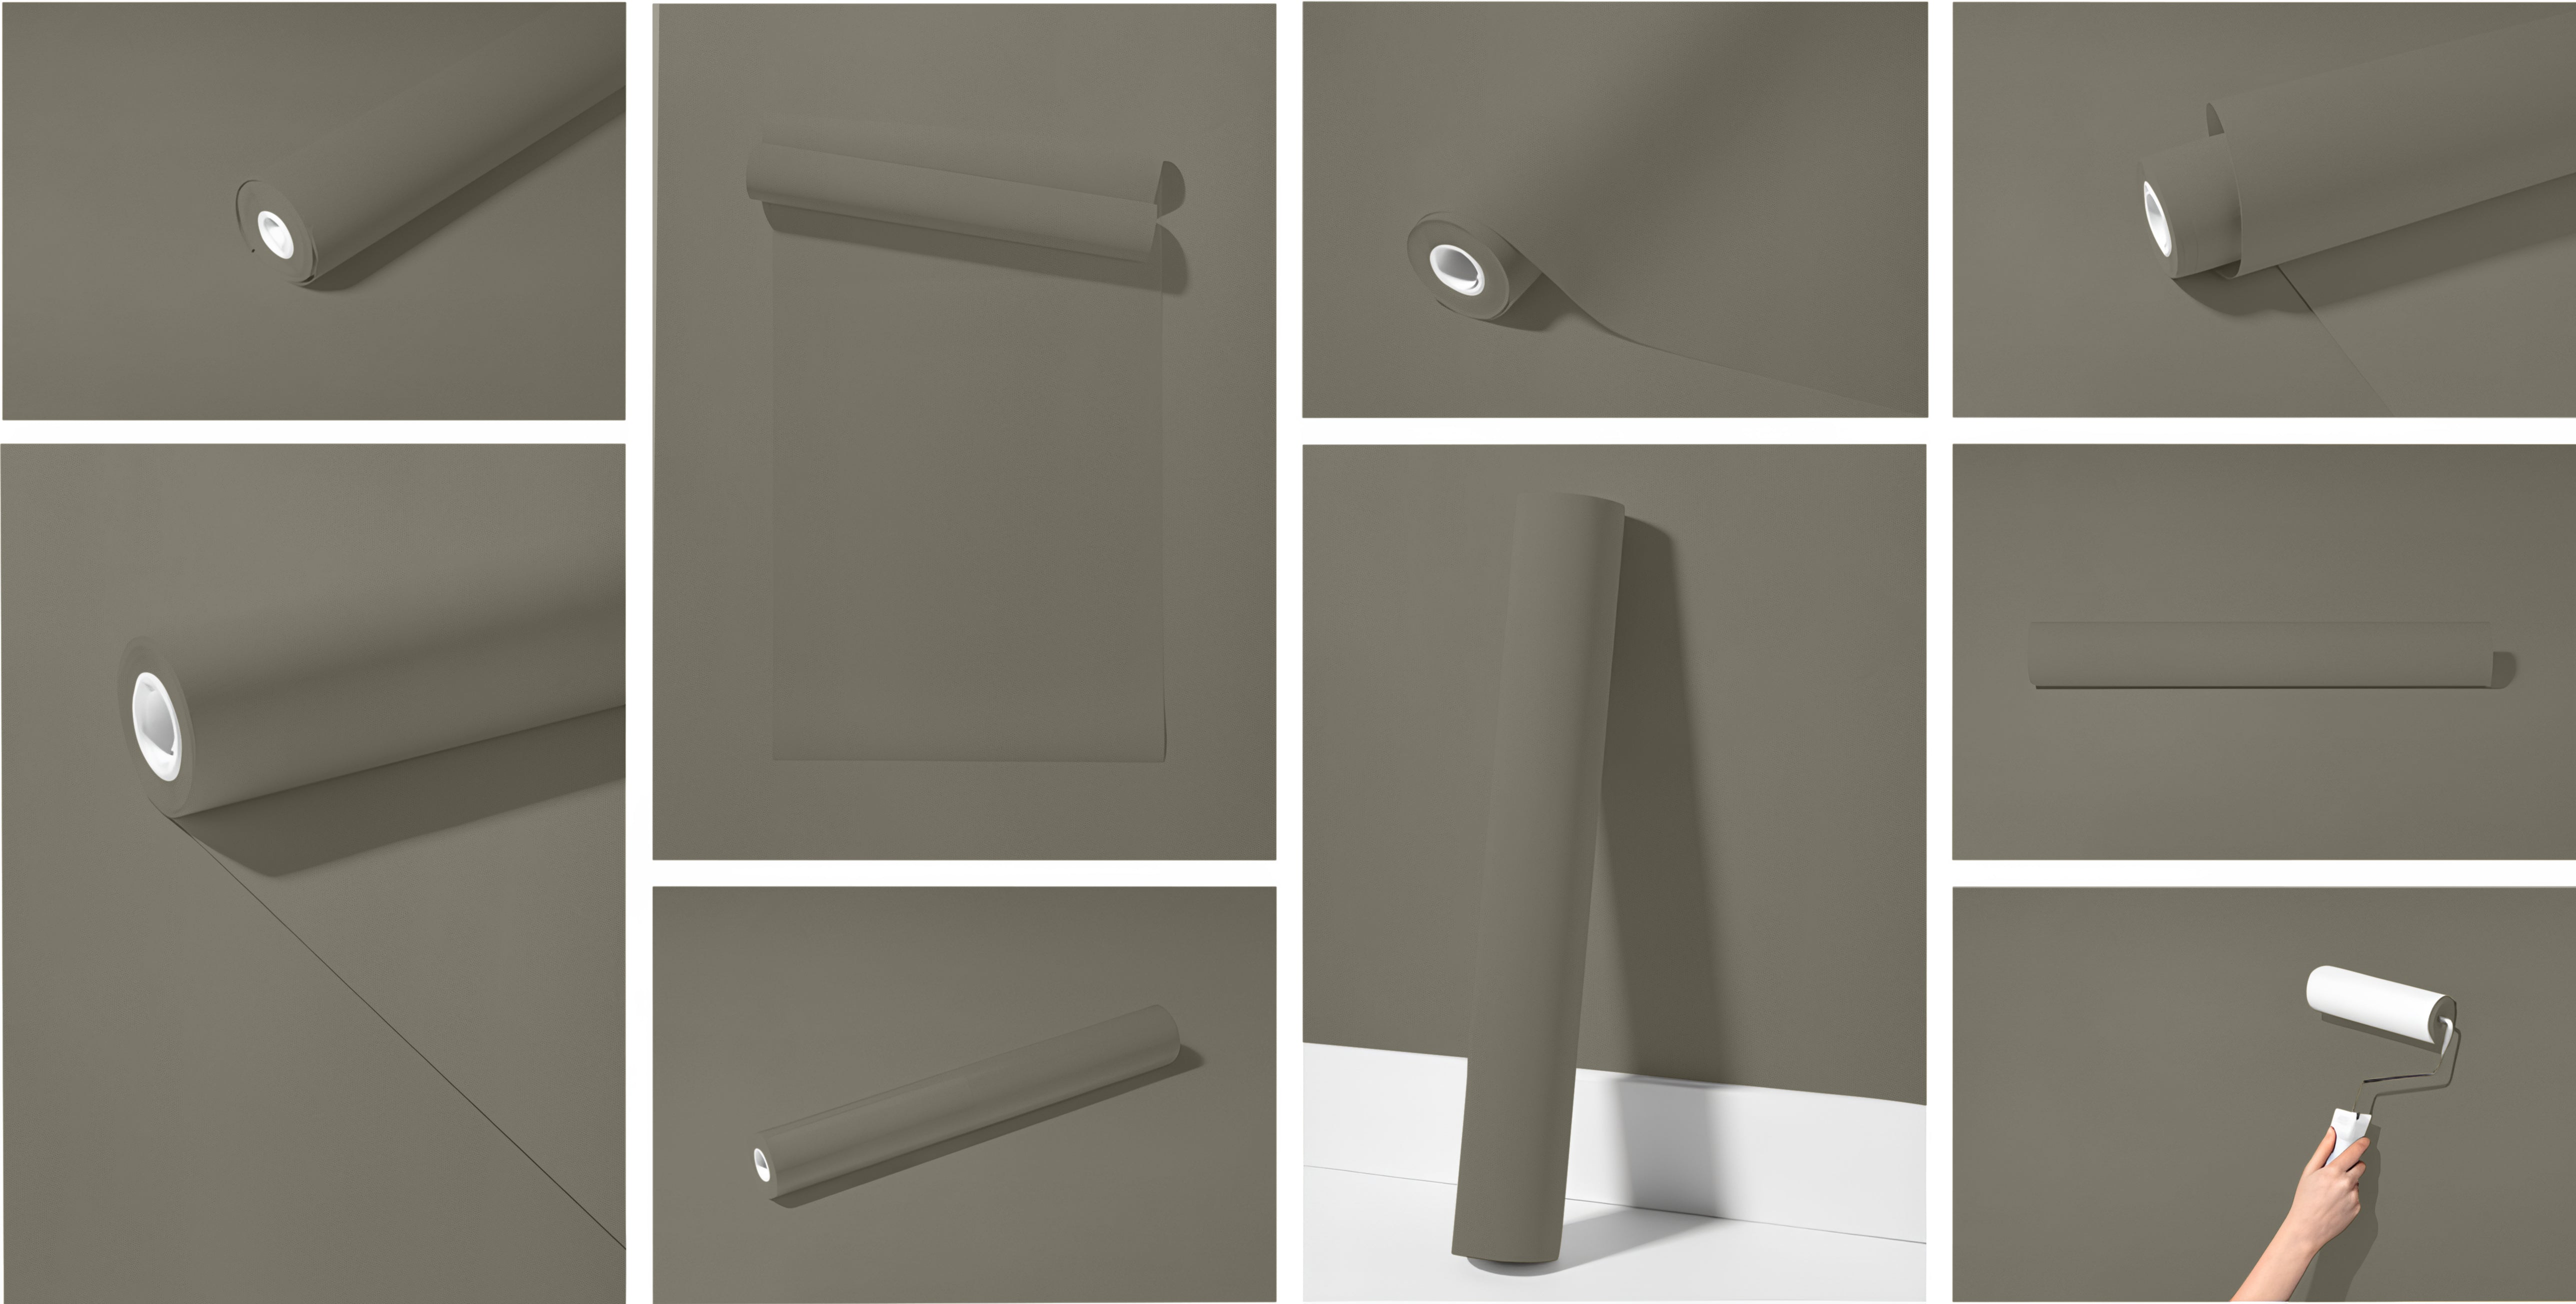 Peel & Stick Removable Re-usable Paint - Color RAL 7003 Moss Grey - offRAL™ - RALRAW LLC, USA